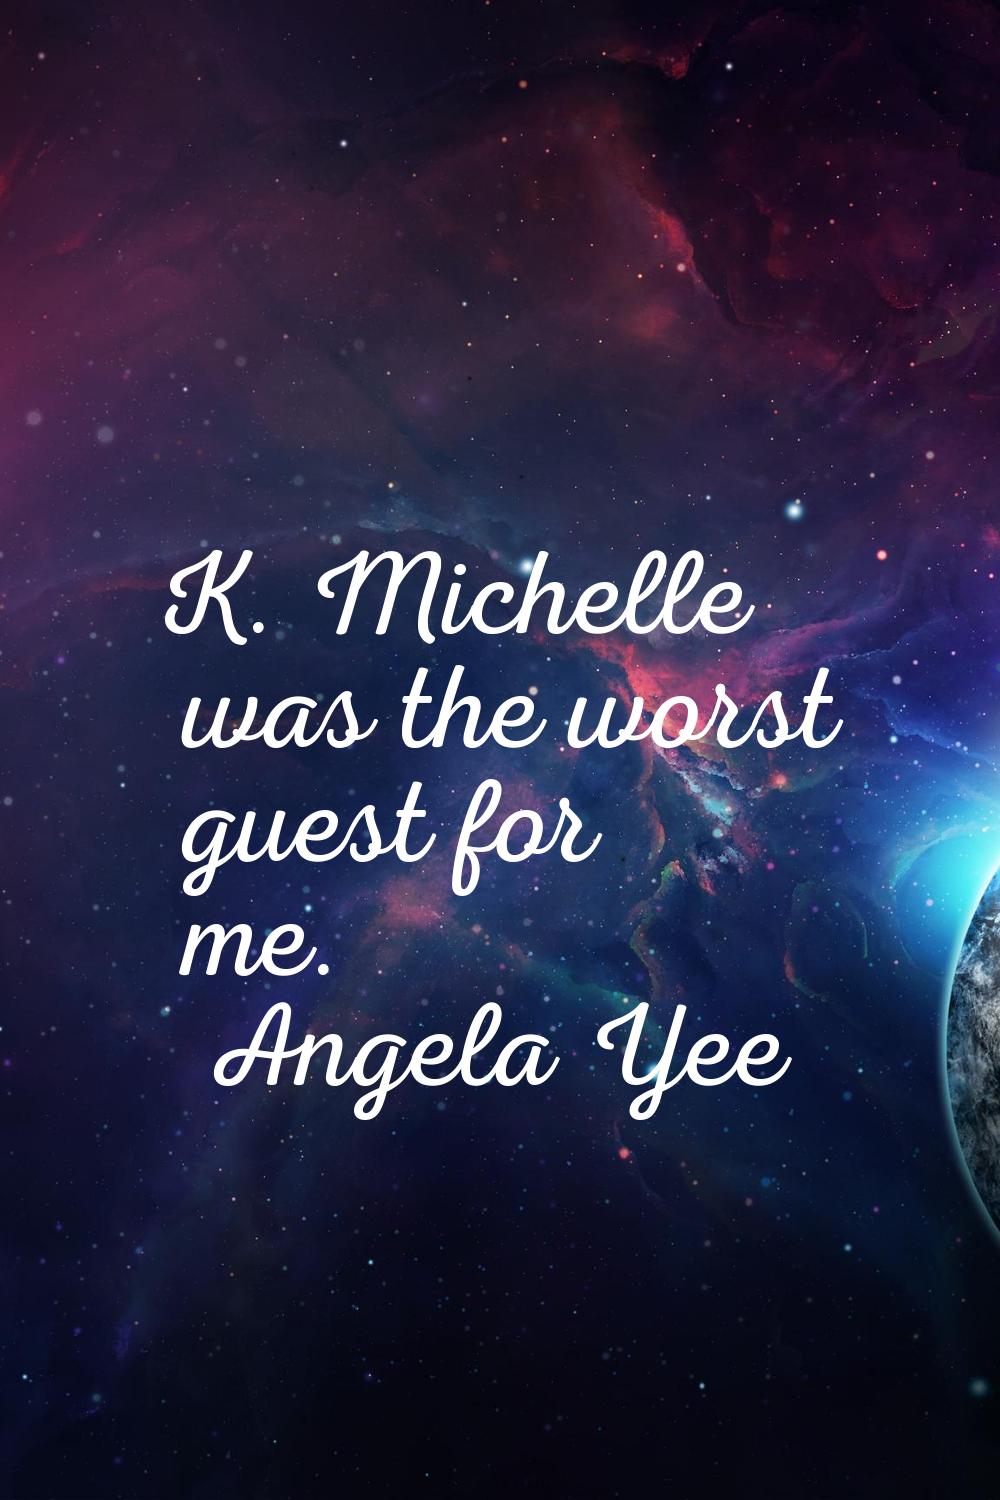 K. Michelle was the worst guest for me.